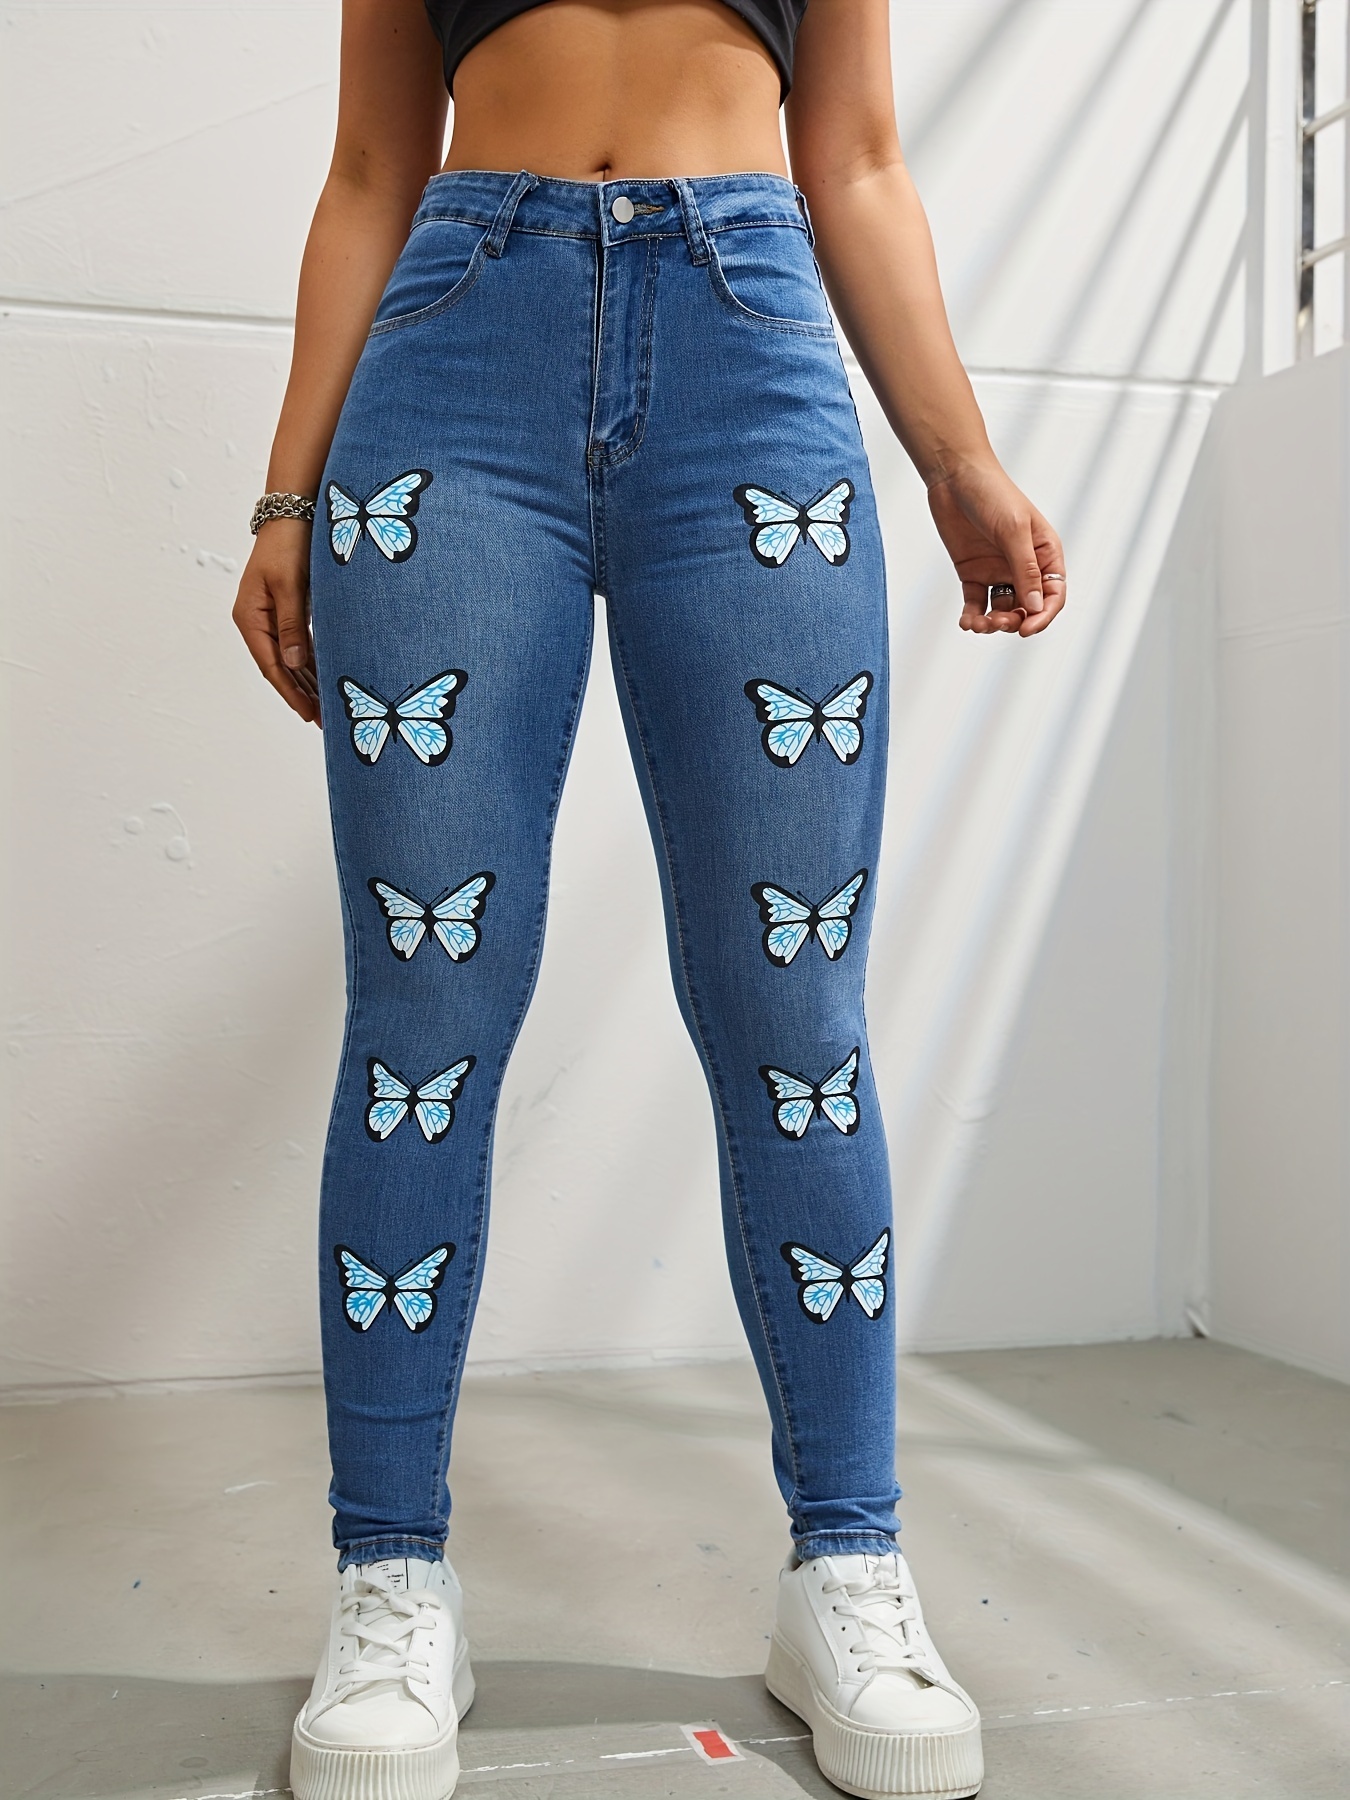 Women's Classic Denim Pants Butterfly Print High Waisted Denim Legging Slim  Fit Stretch Skinny Jeans Pants (Blue,Small) at  Women's Jeans store